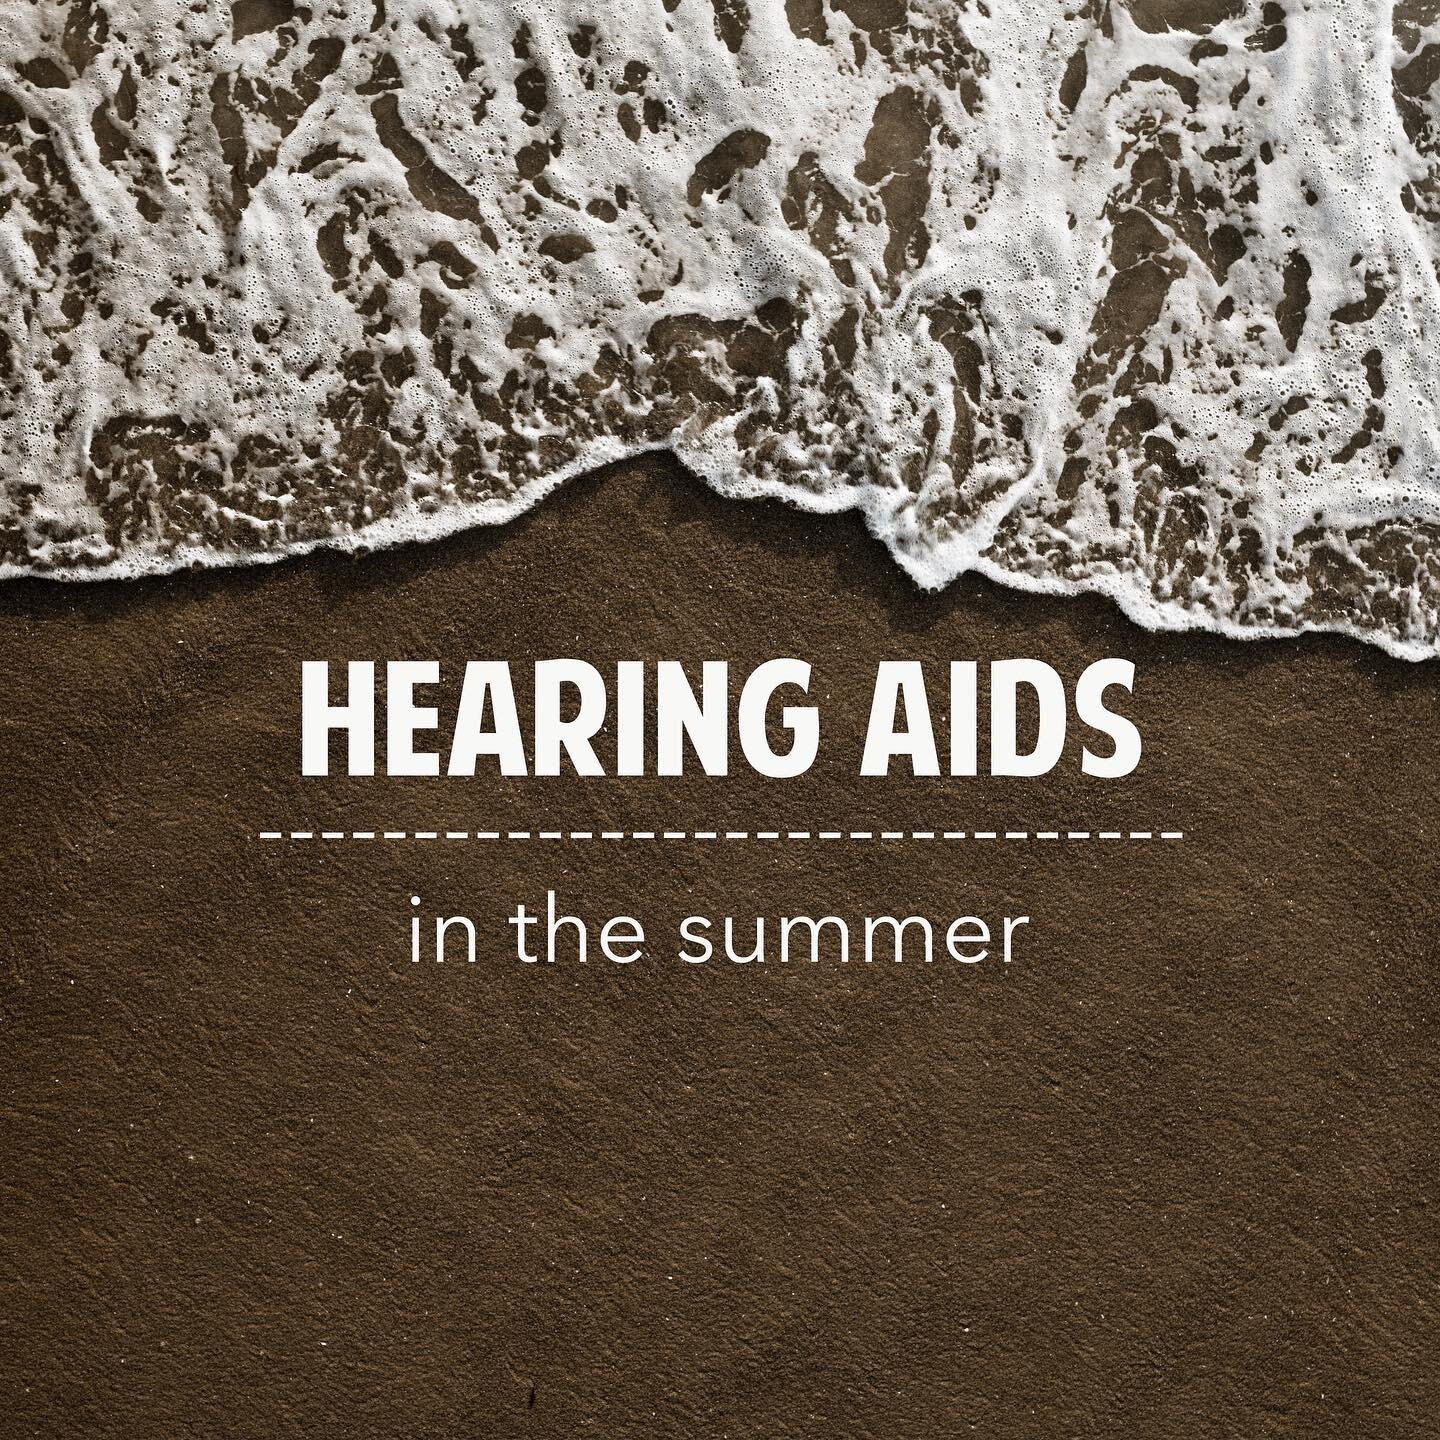 HOW TO PROTECT YOUR HEARING AIDS IN THE SUMMER:

1. Get a dry &amp; store unit for your hearing aids. This is a dehumidifier that will help not only keep your hearing aids dry, but also help to clear out ear wax and bad odors.

2. Avoid water. Remove